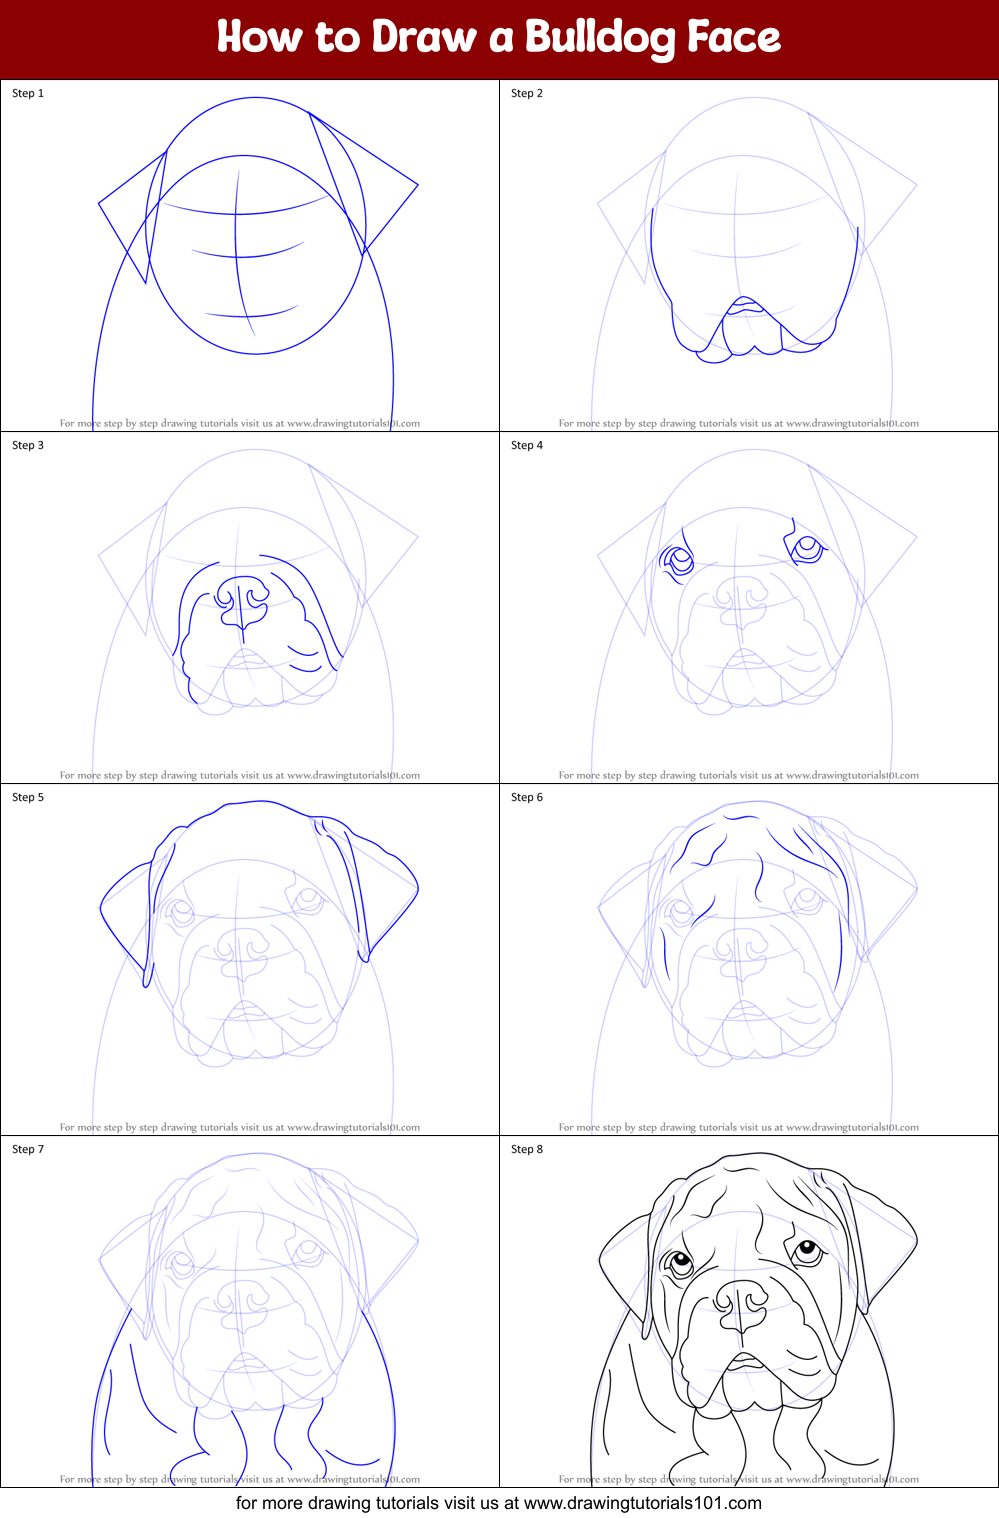 How to Draw a Bulldog Face printable step by step drawing sheet